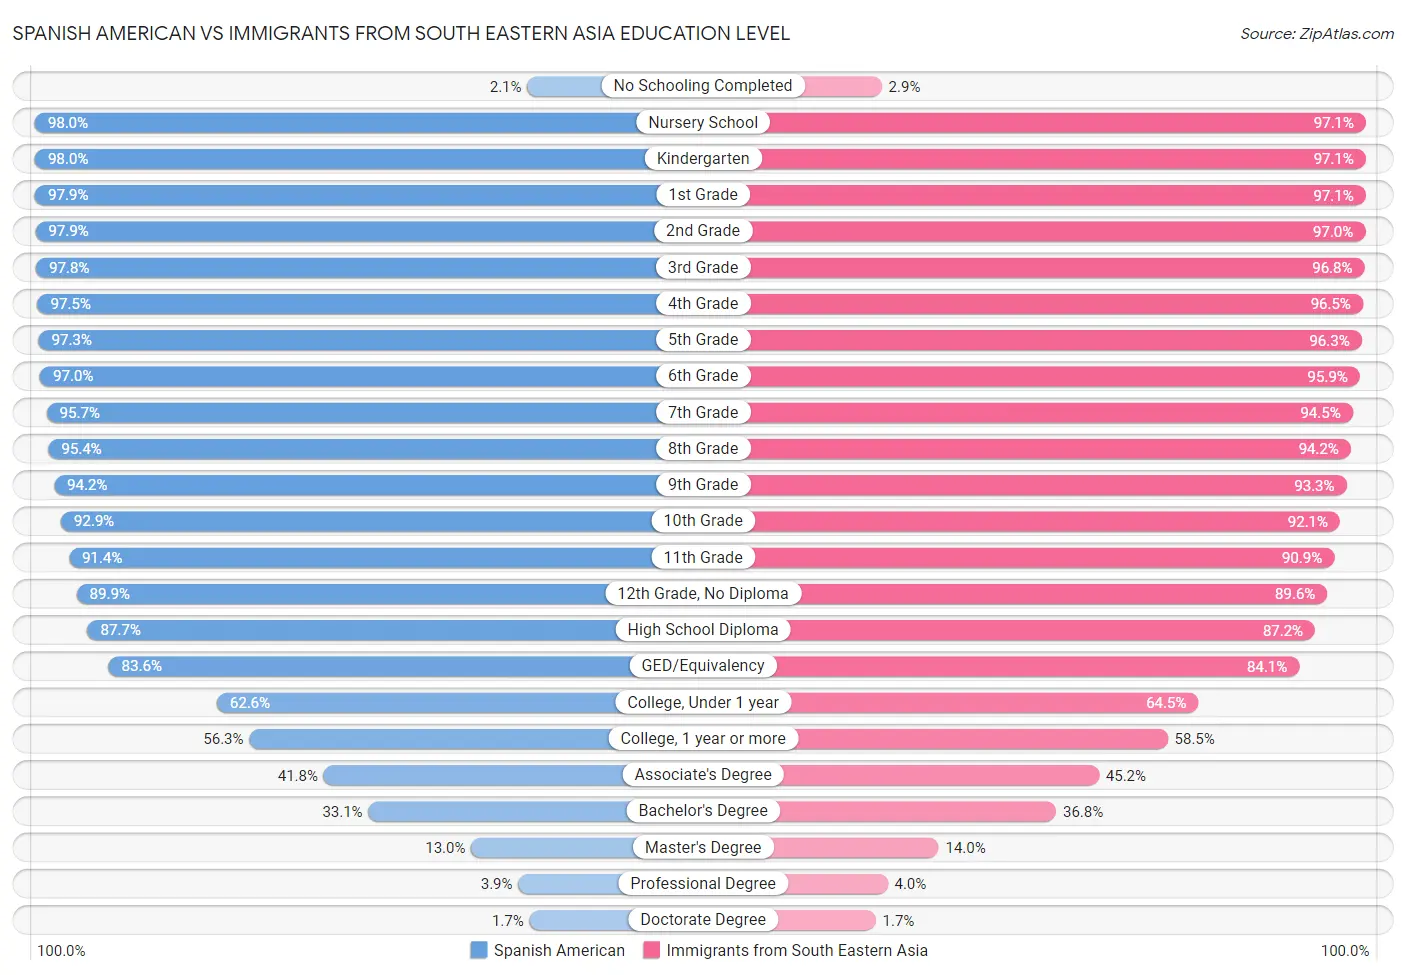 Spanish American vs Immigrants from South Eastern Asia Education Level